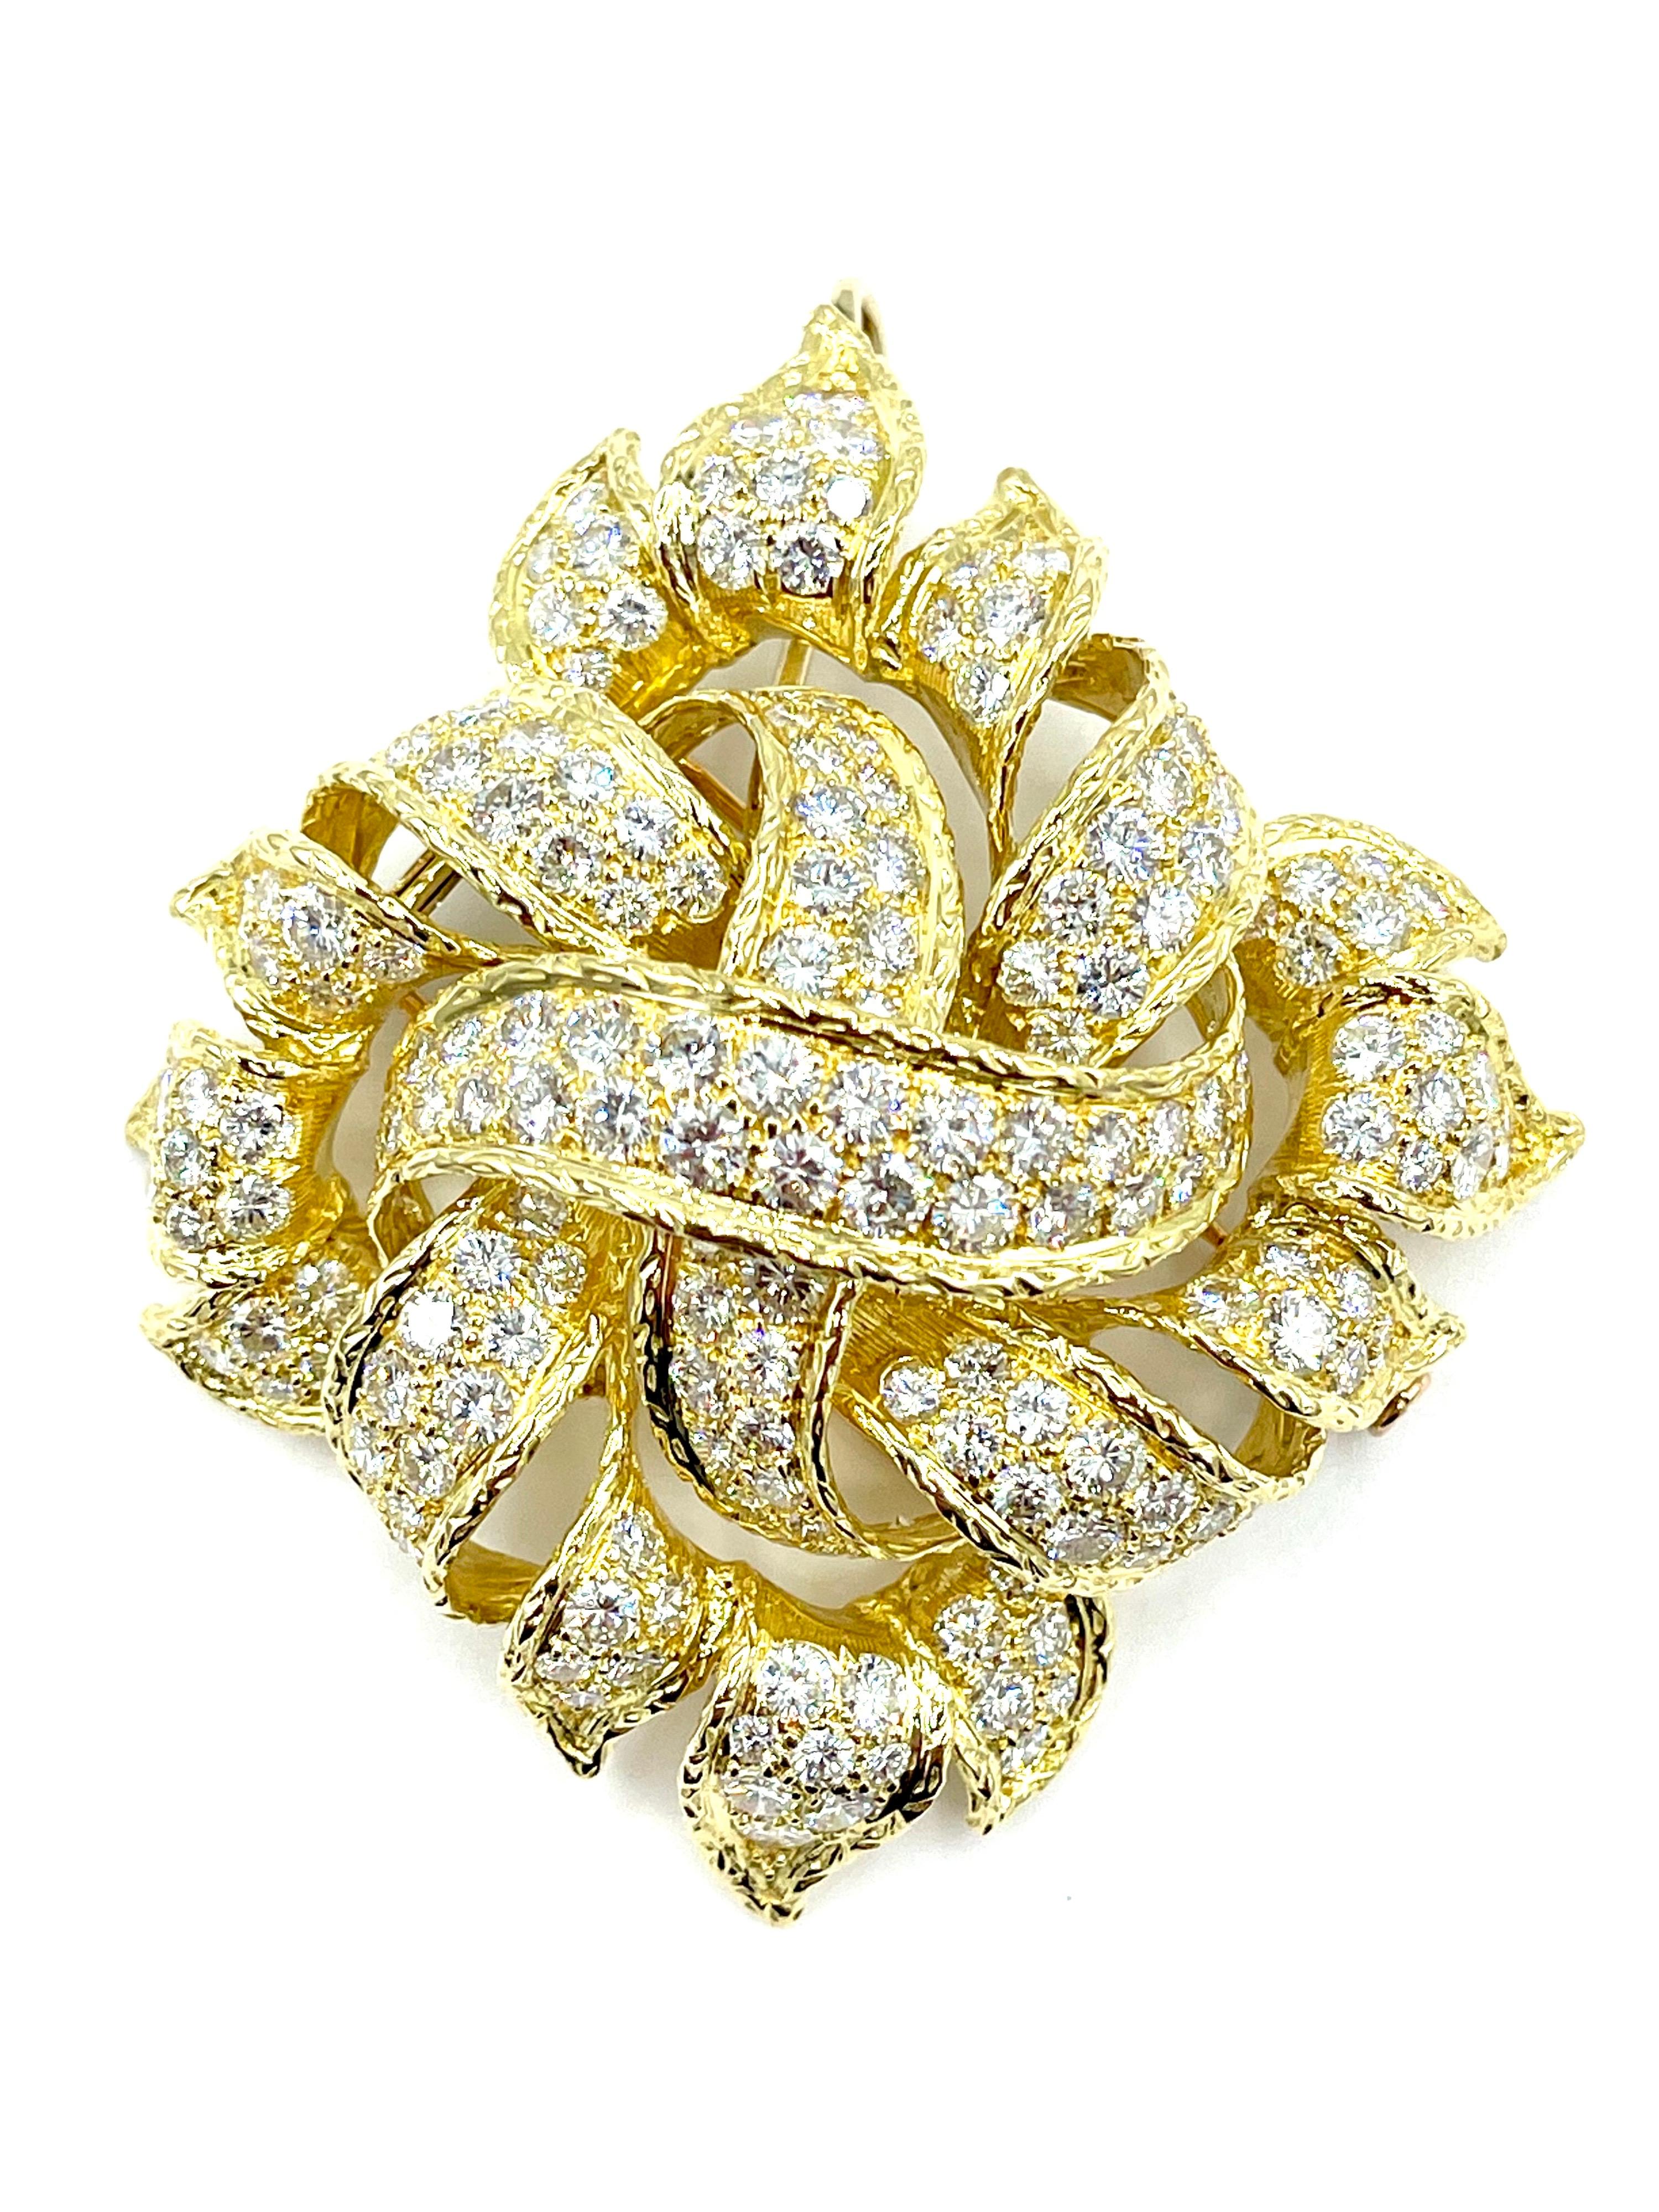 An amazingly vibrant French made ribbon pendant/brooch!  The 188 high quality round brilliant Diamonds combine for a weight of 13.00 carats.  The Diamonds are graded as E-F color, VS clarity.  The piece features a hidden bale to be worn as a pendant